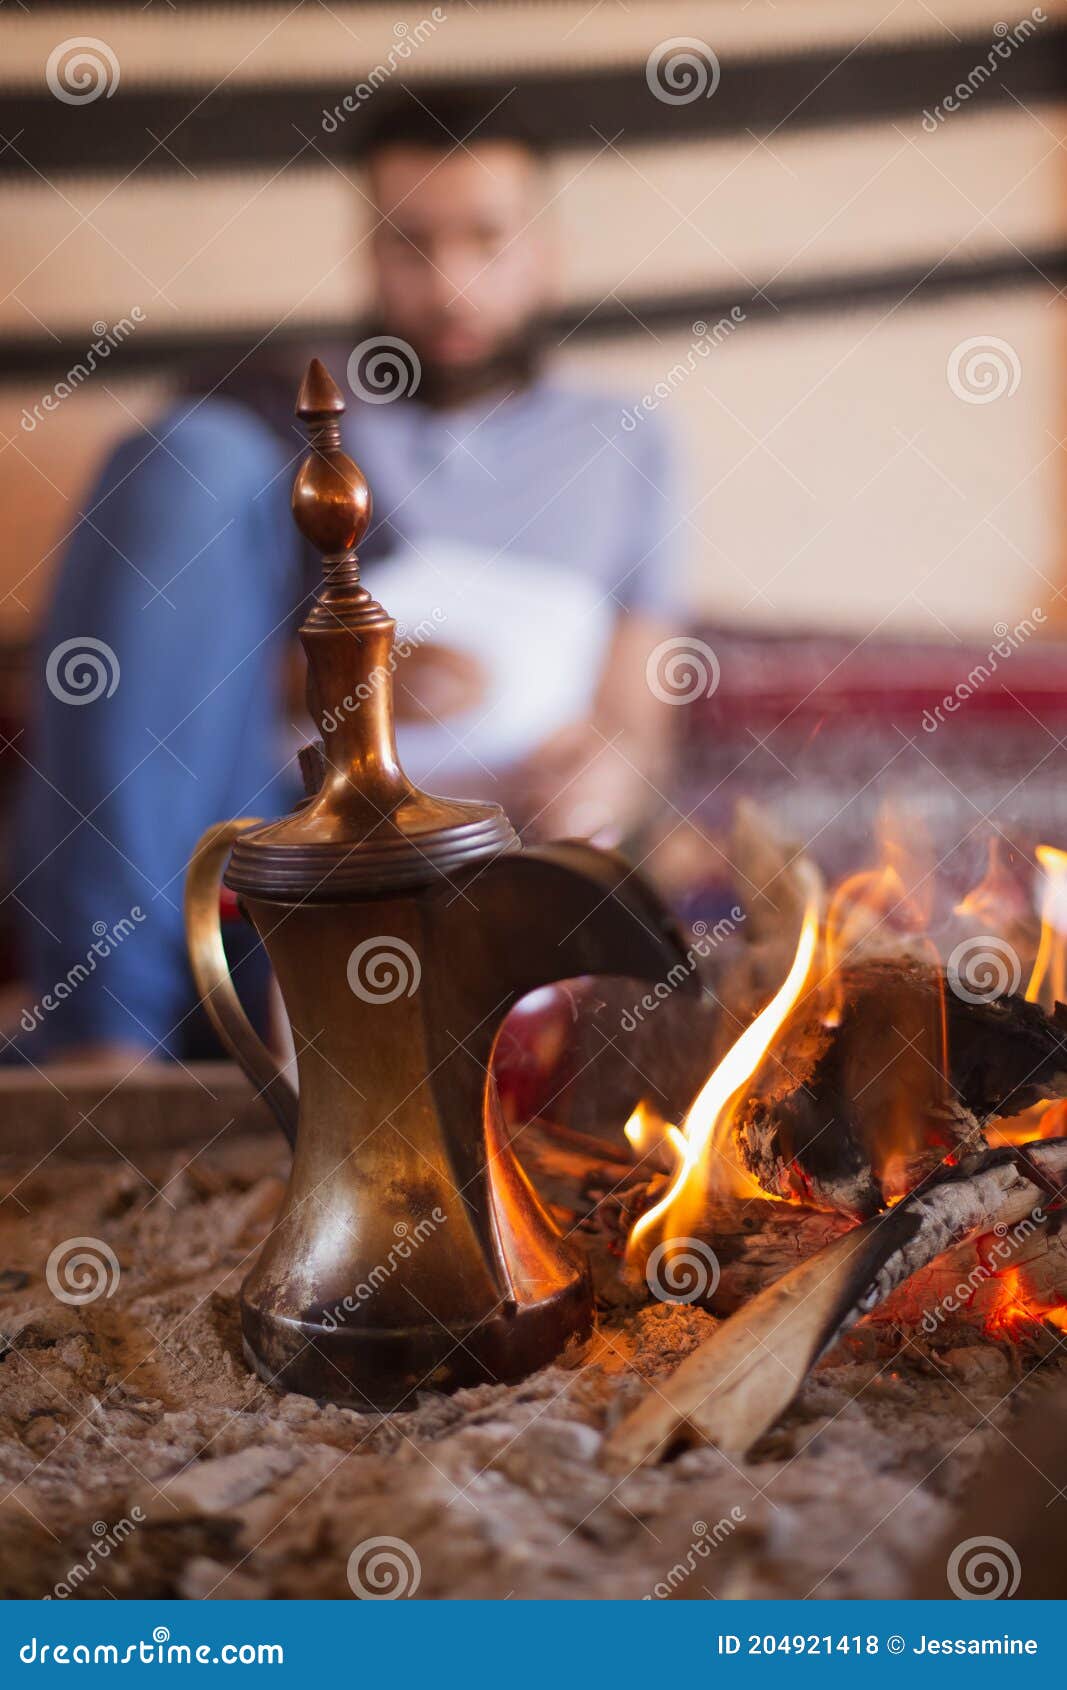 Traditional Arabic Coffee Pot Named Dallah In Fireplace Stock Photo